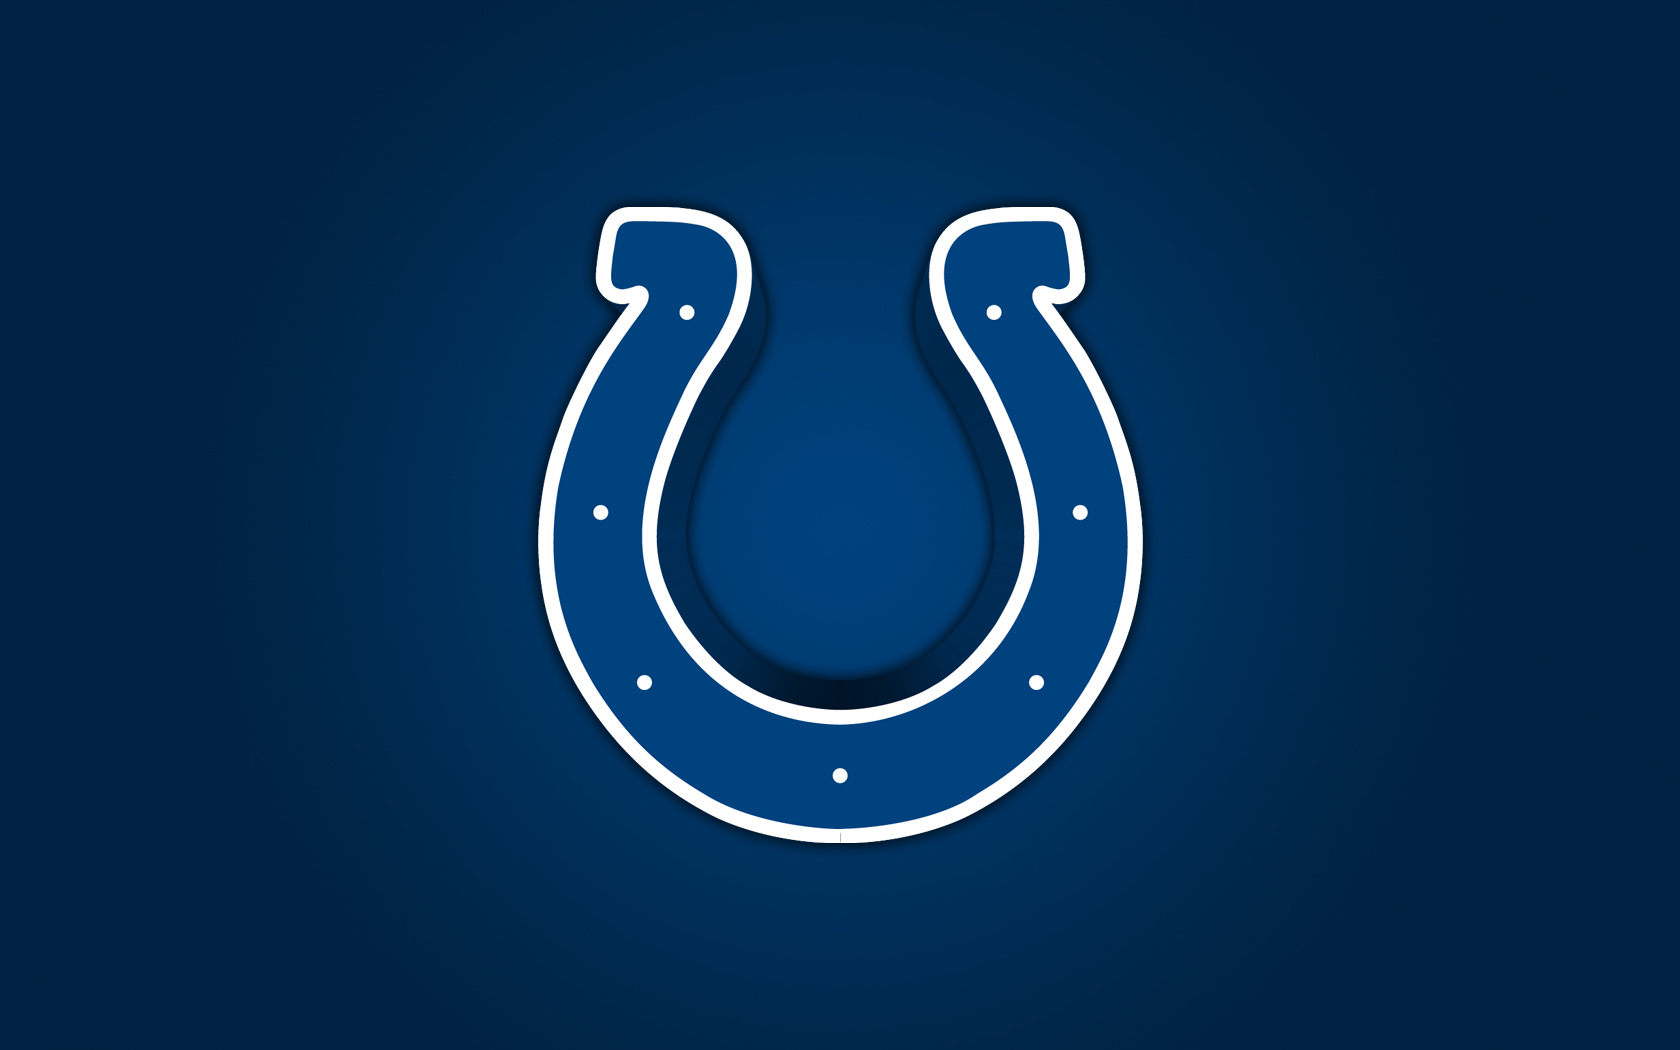 Download "Indianapolis Colts" wallpapers for mobile phone, free "Indianapolis Colts" HD pictures